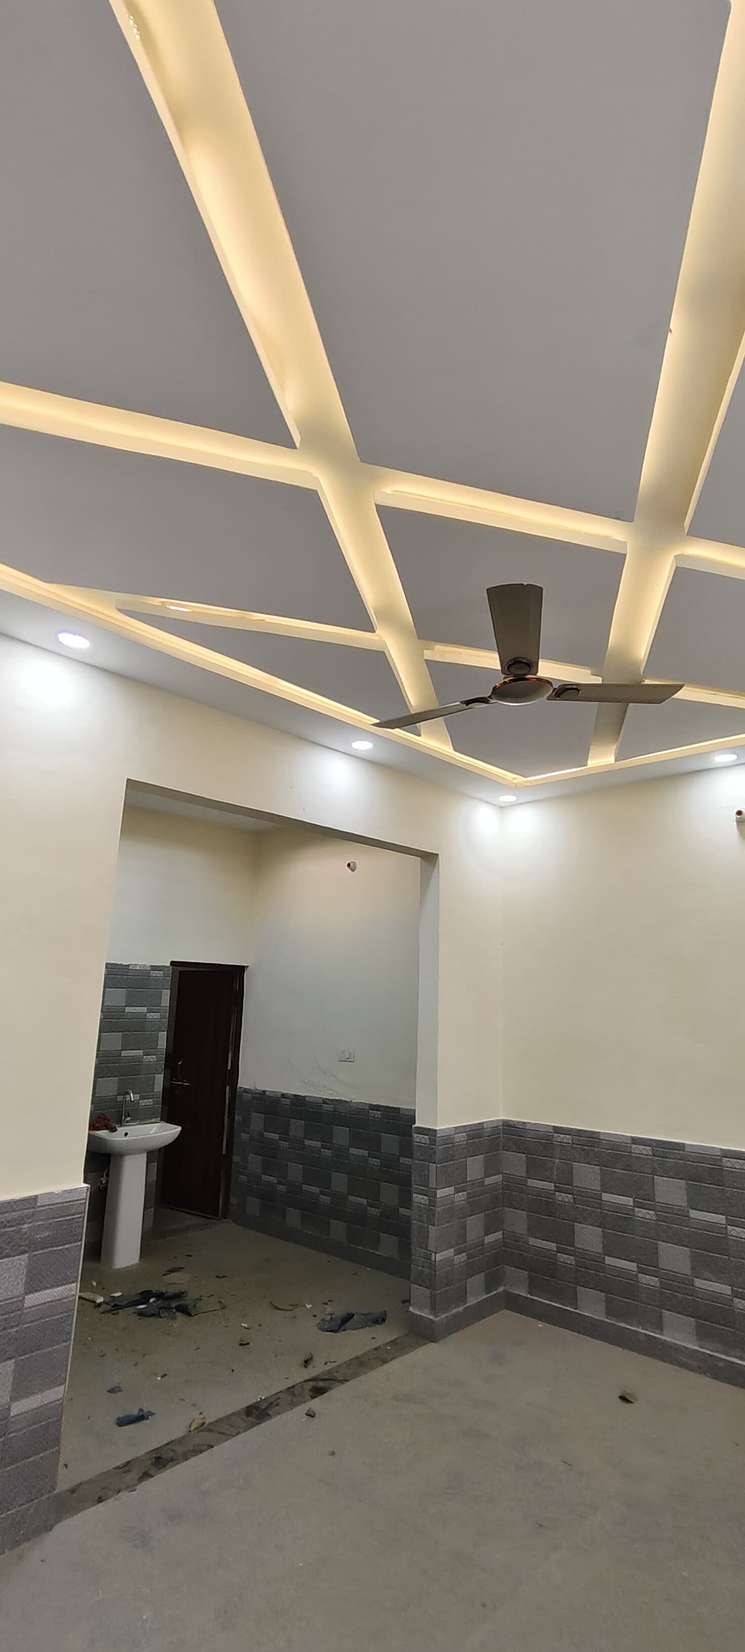 1.5 Bedroom 530 Sq.Ft. Independent House in Madhu Nagar Agra